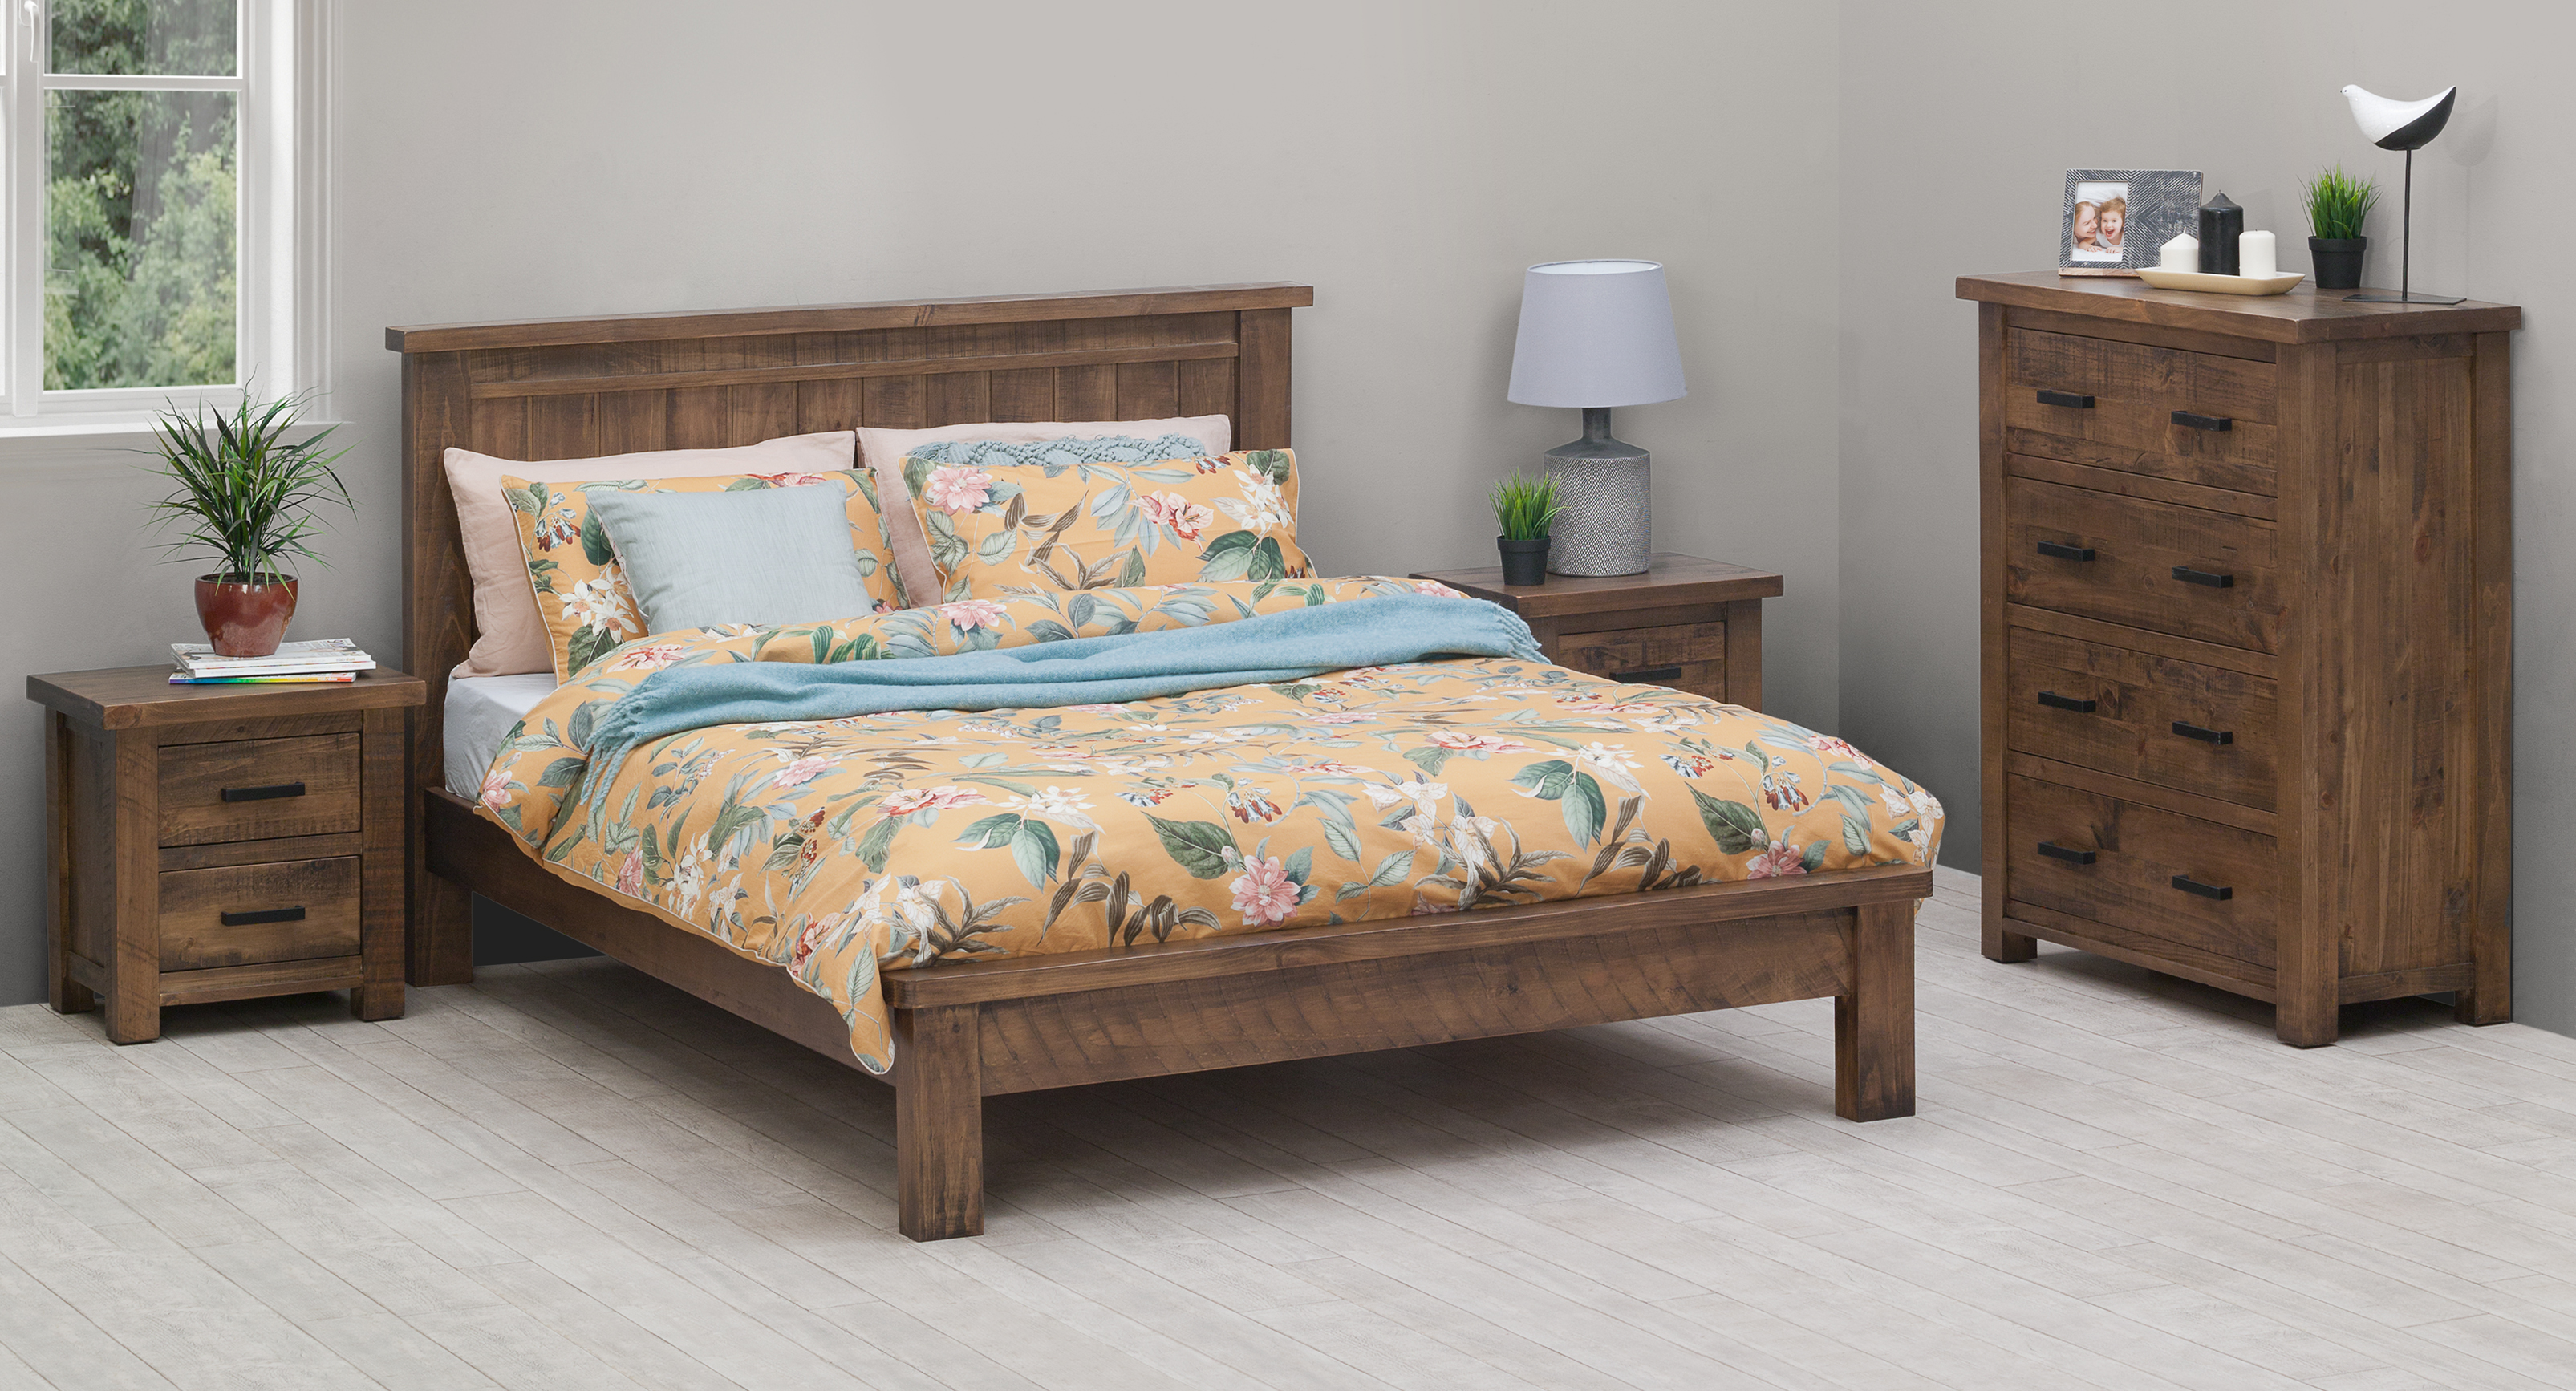 Maleny Bedroom Collection